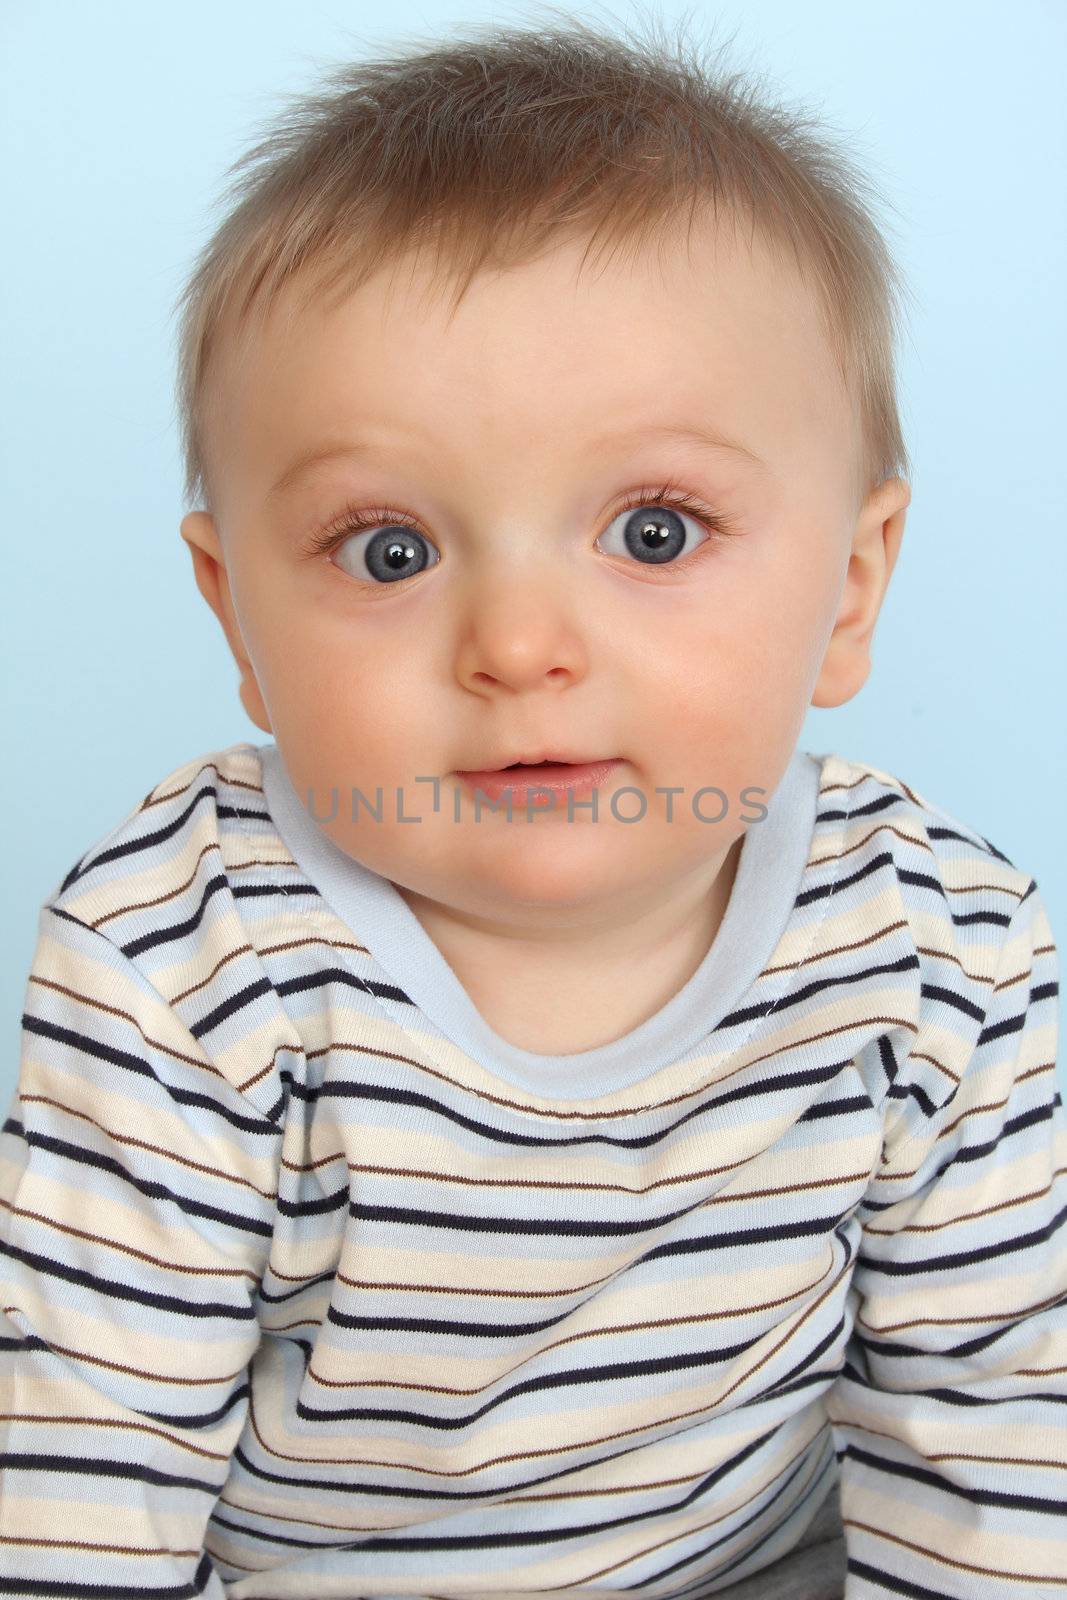 Surprized looking baby boy against a blue background